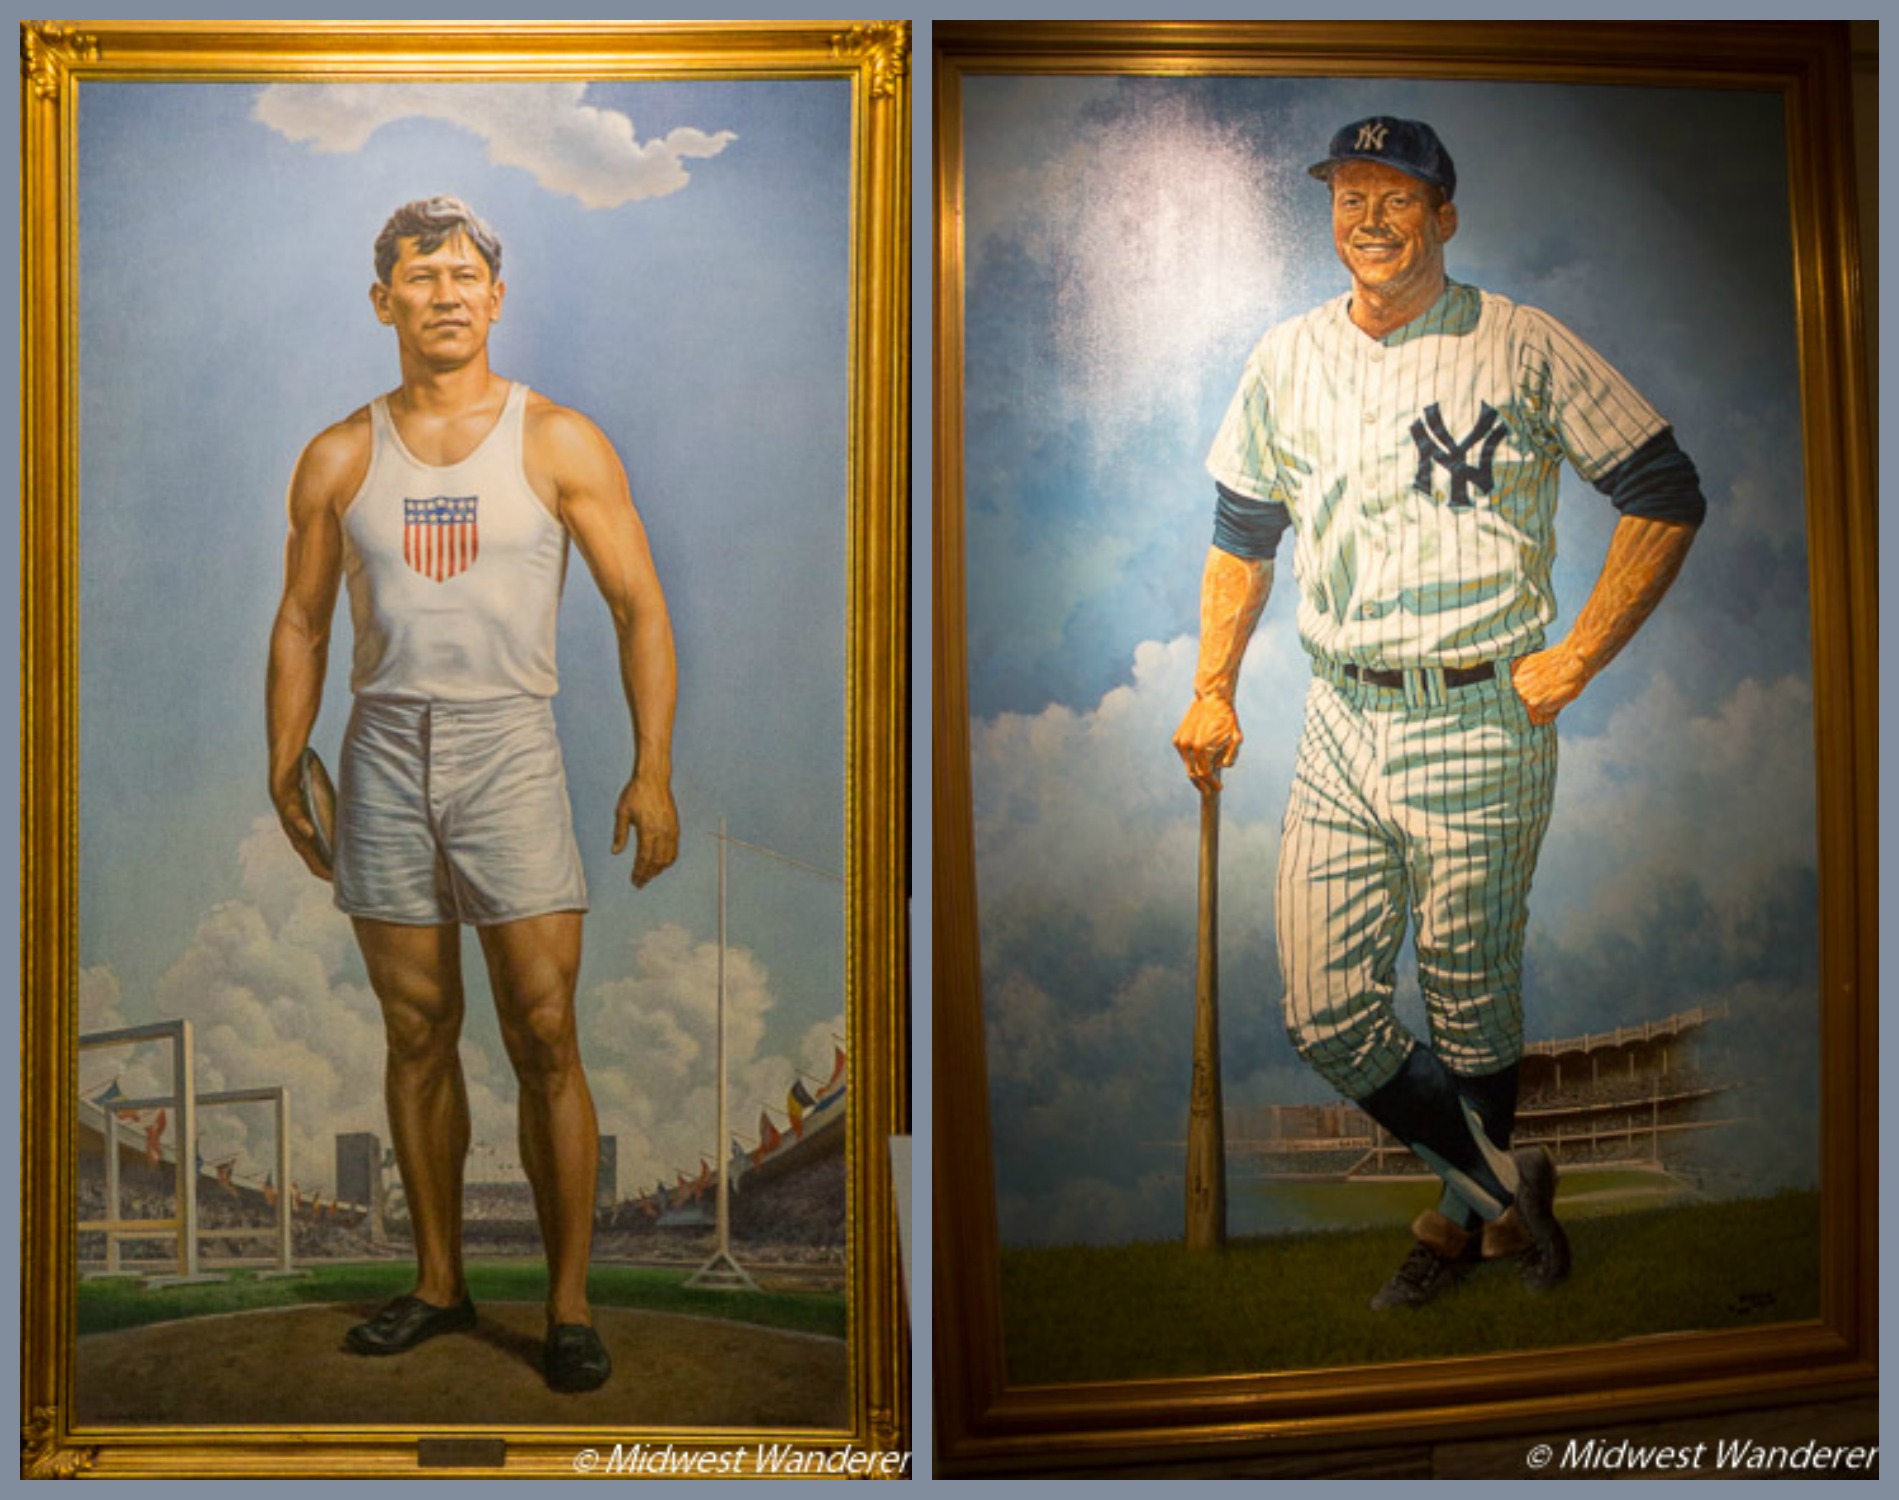 Jim Thorpe and Mickey Mantle